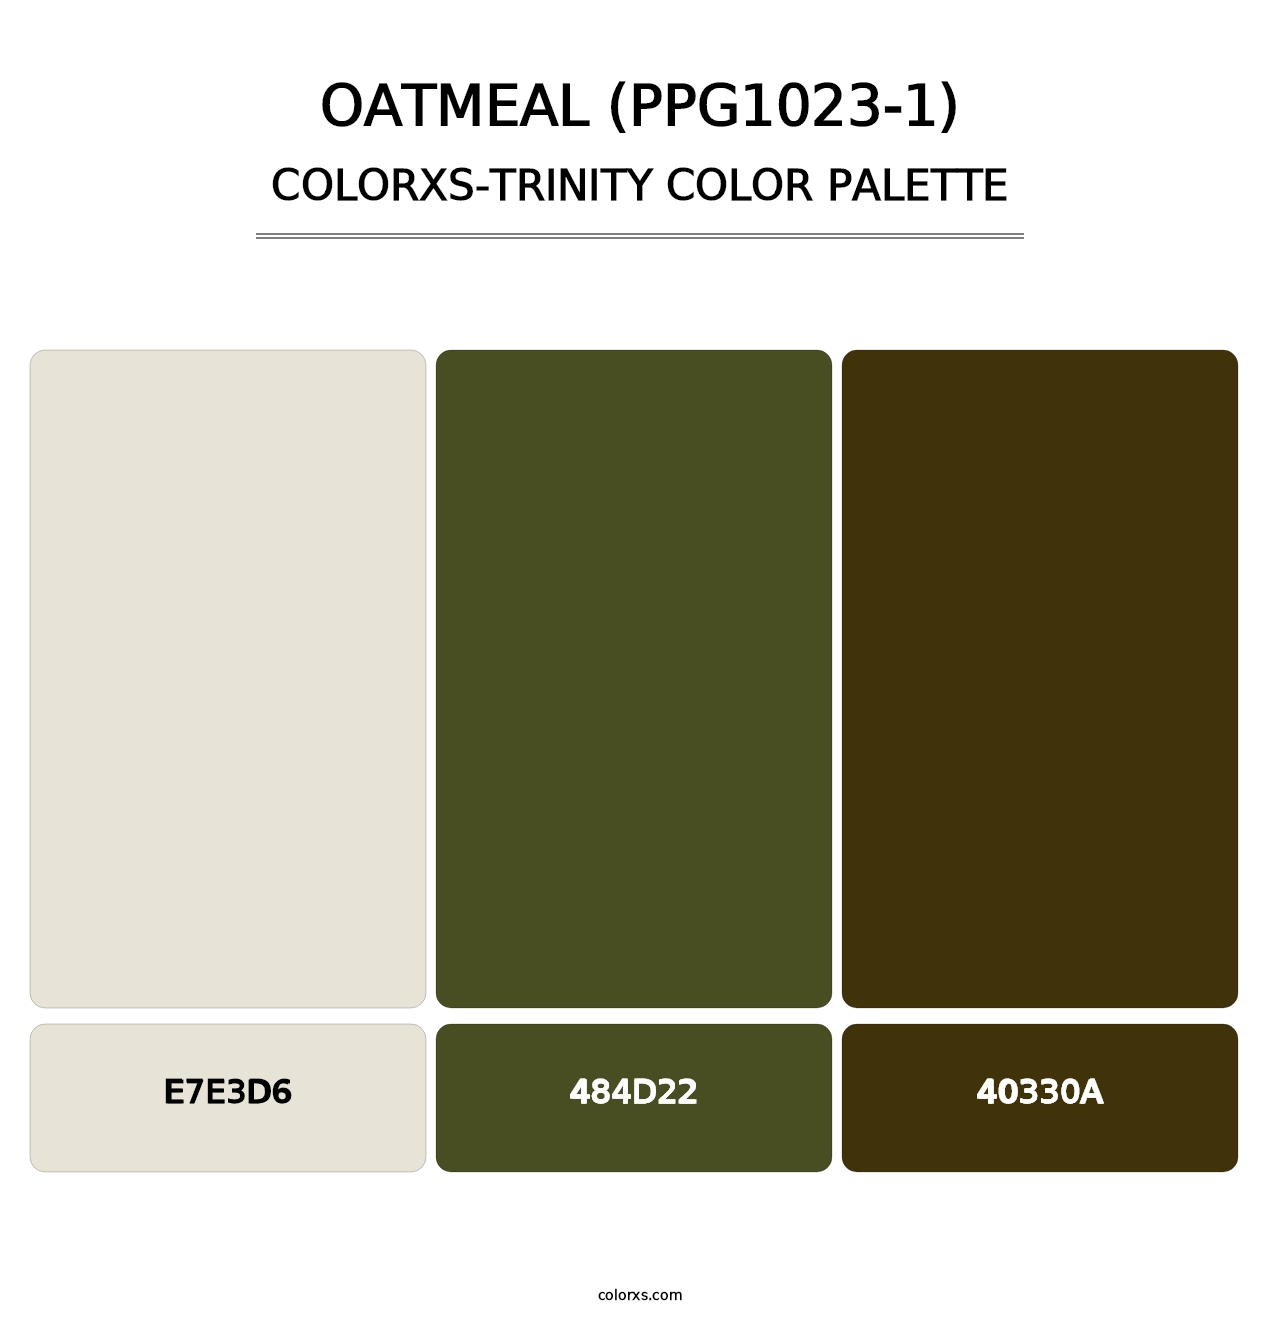 Oatmeal (PPG1023-1) - Colorxs Trinity Palette